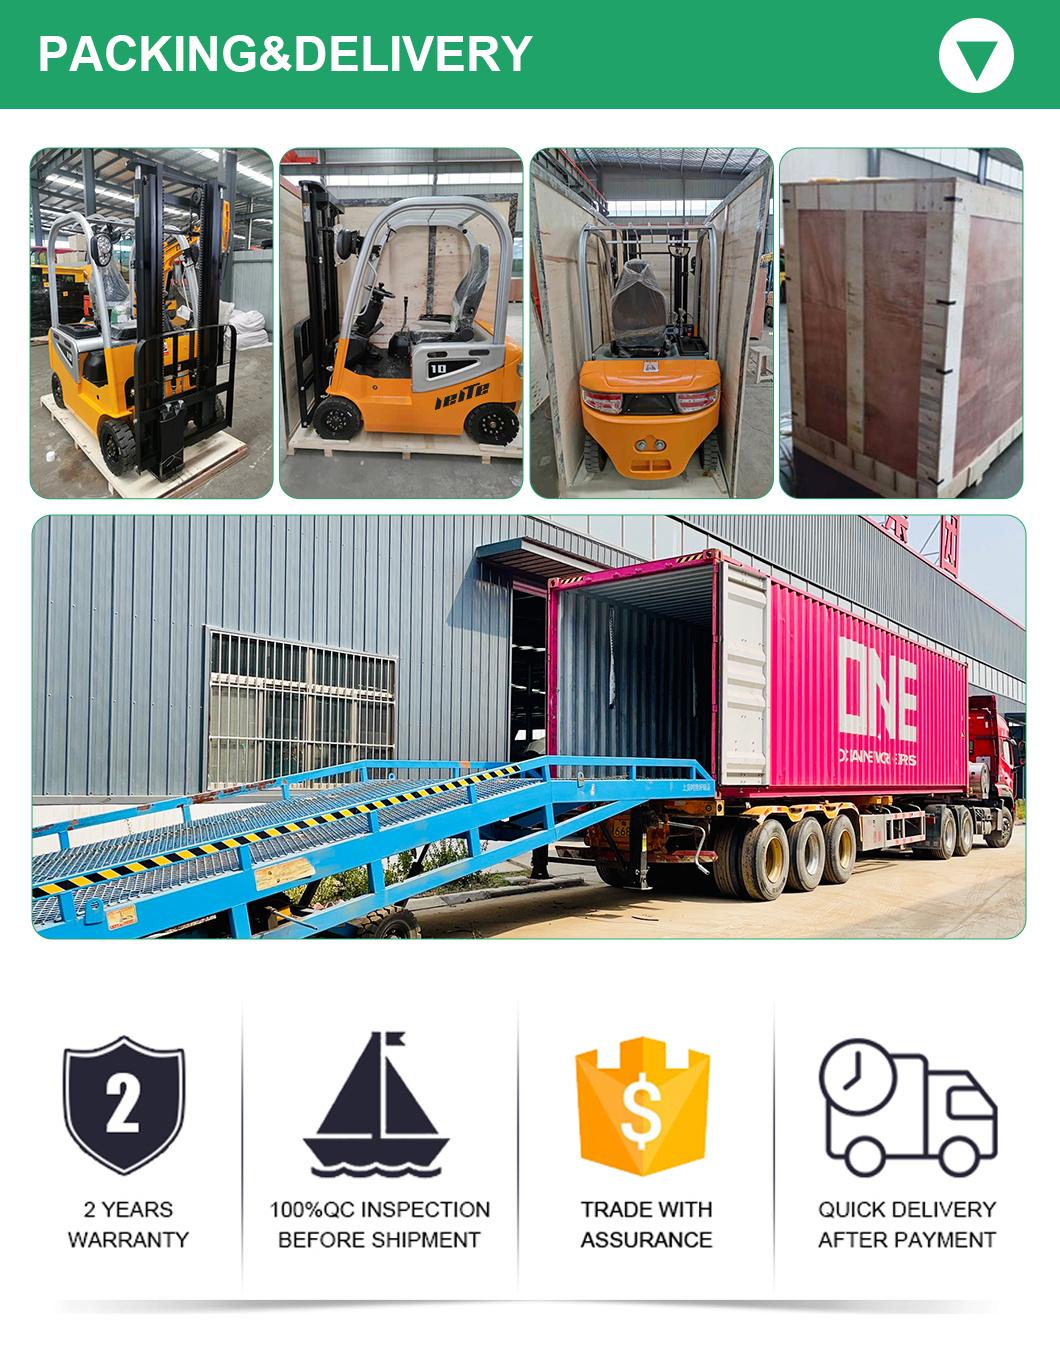 CE Certified 2 Ton 3 Ton 4 Wheel Mini Forklift in Warehouse Fully Electric China Forklift Lift Truck Price